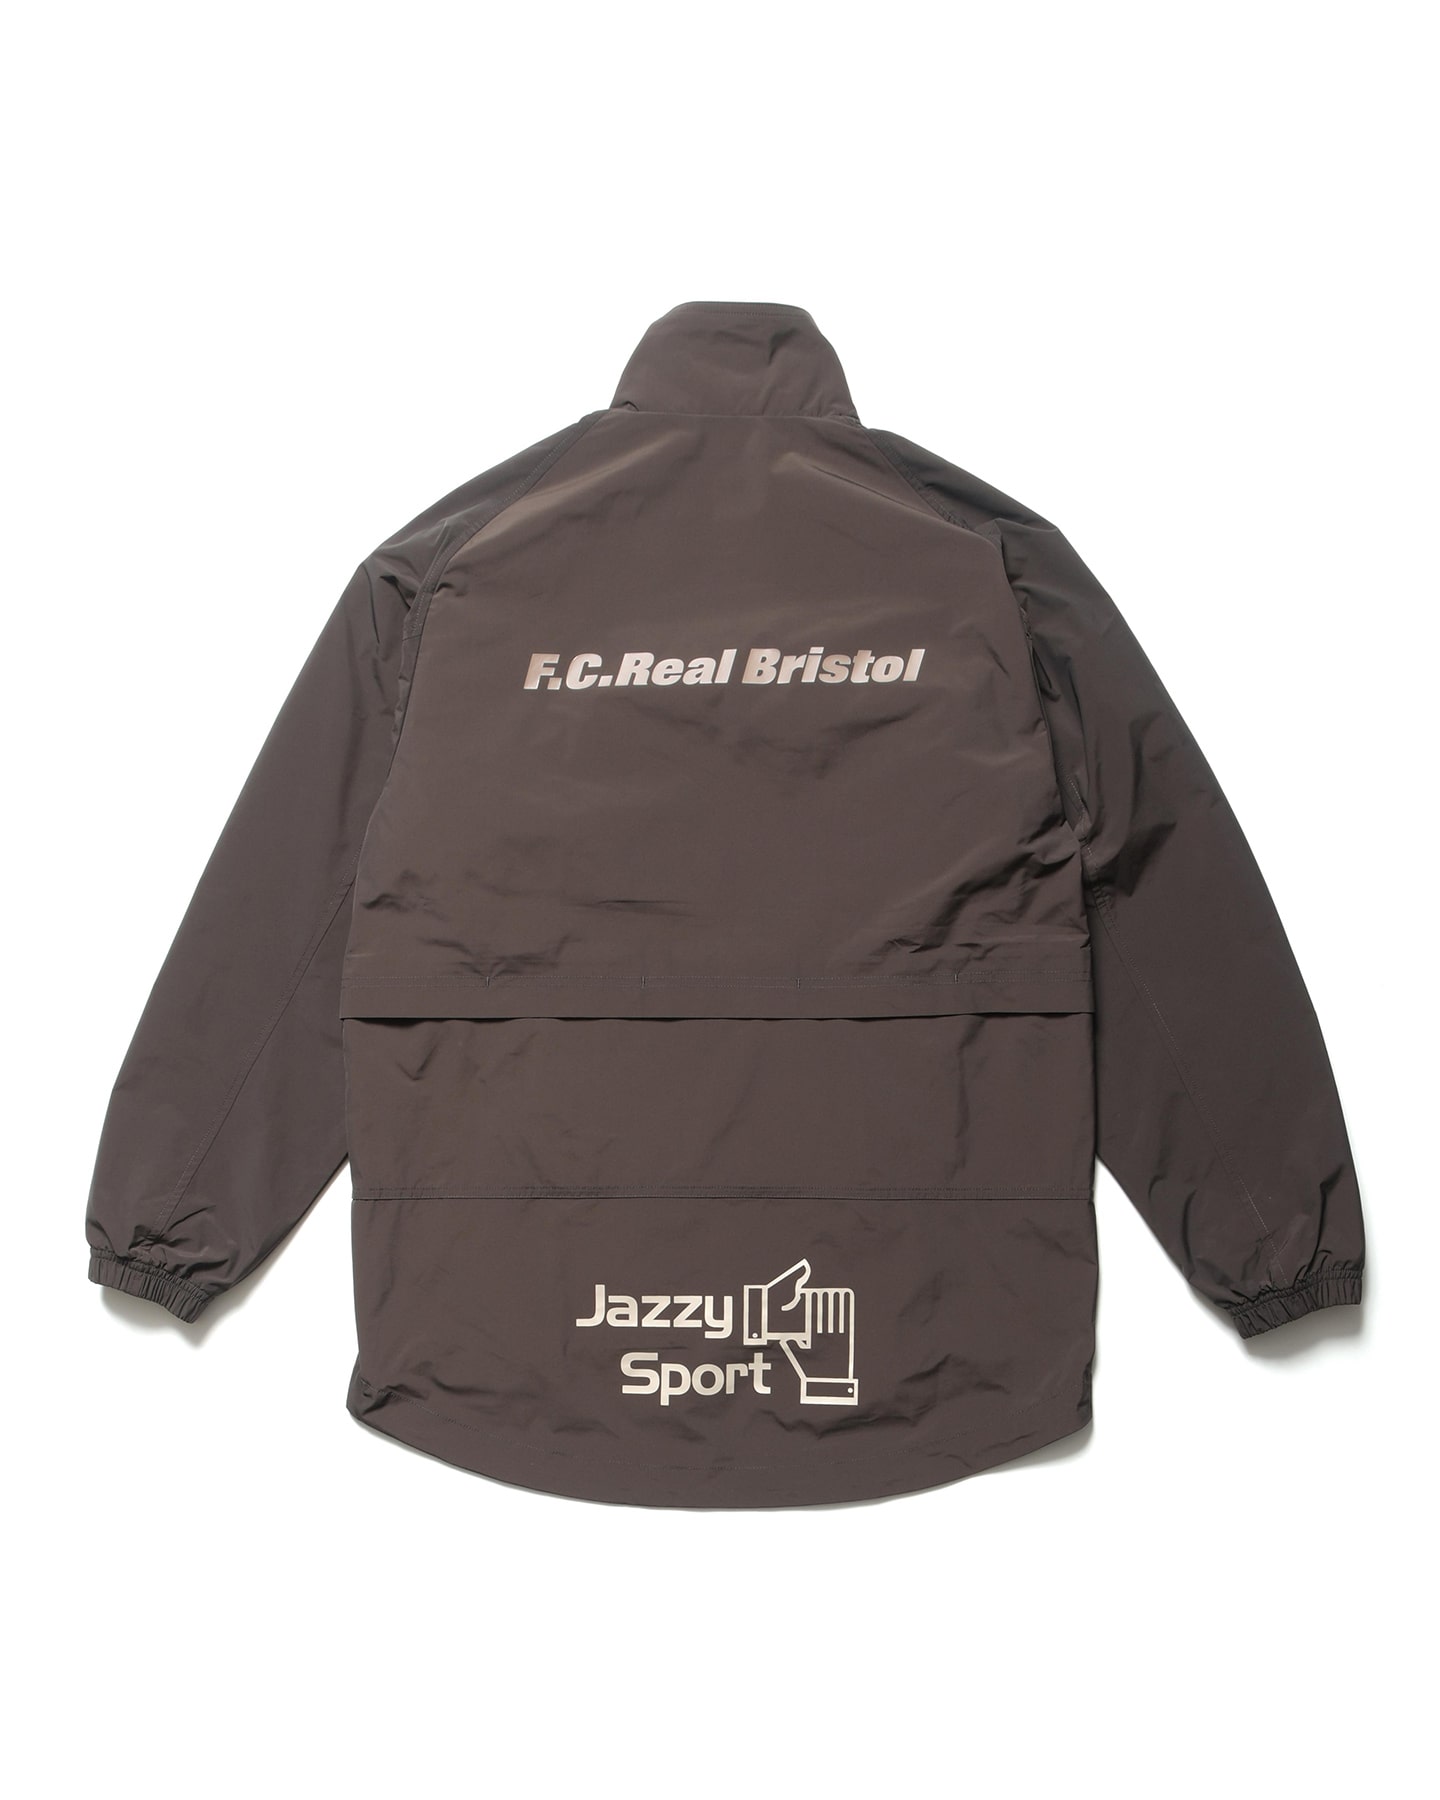 FCRB JAZZY SPORT WARM UP JACKET & PANTS-